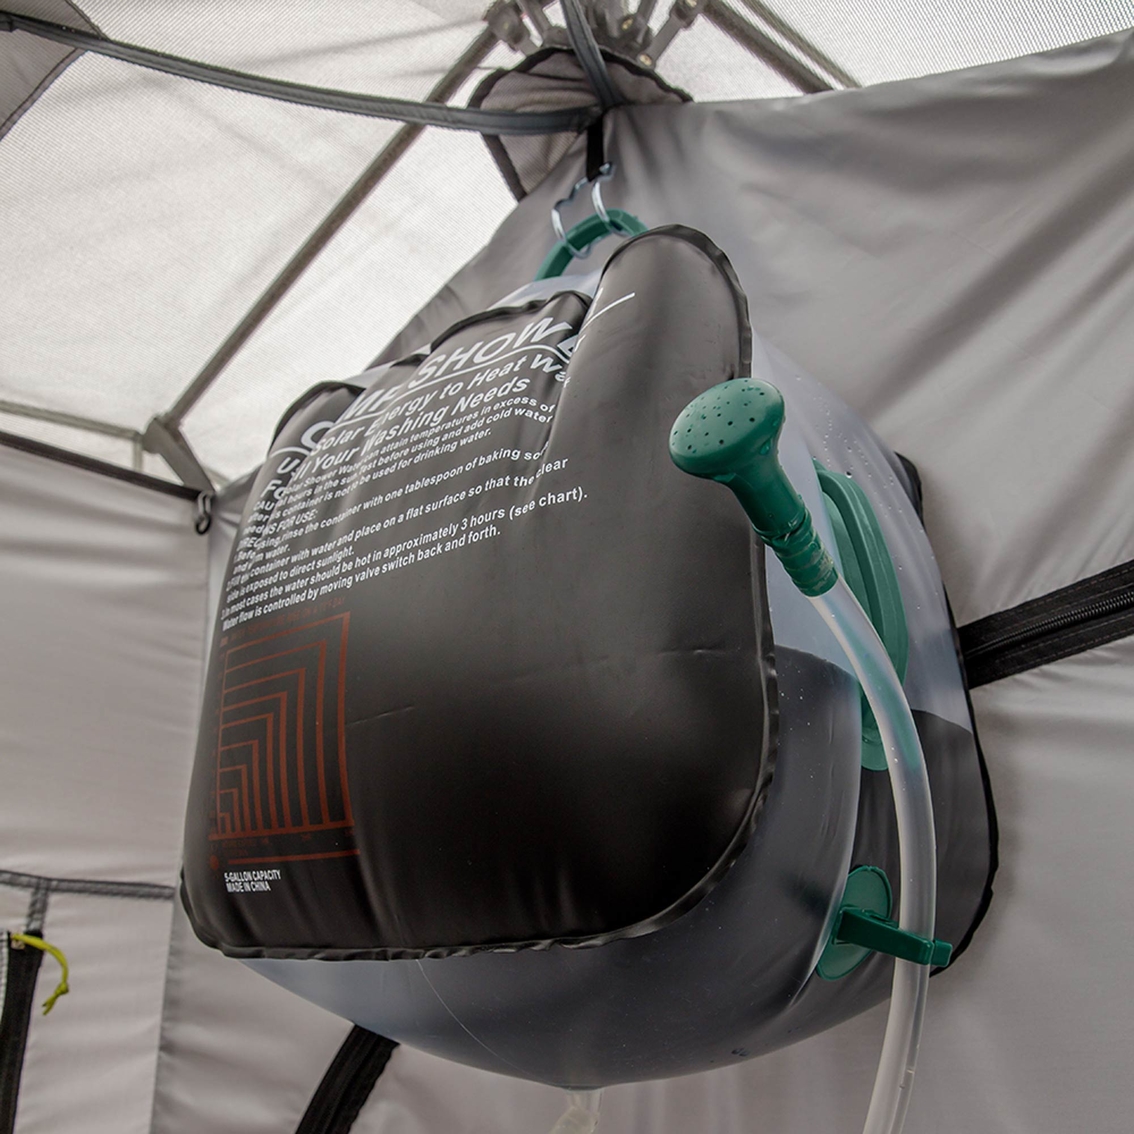 Core Equipment Instant Shower Tent - Image 6 of 10